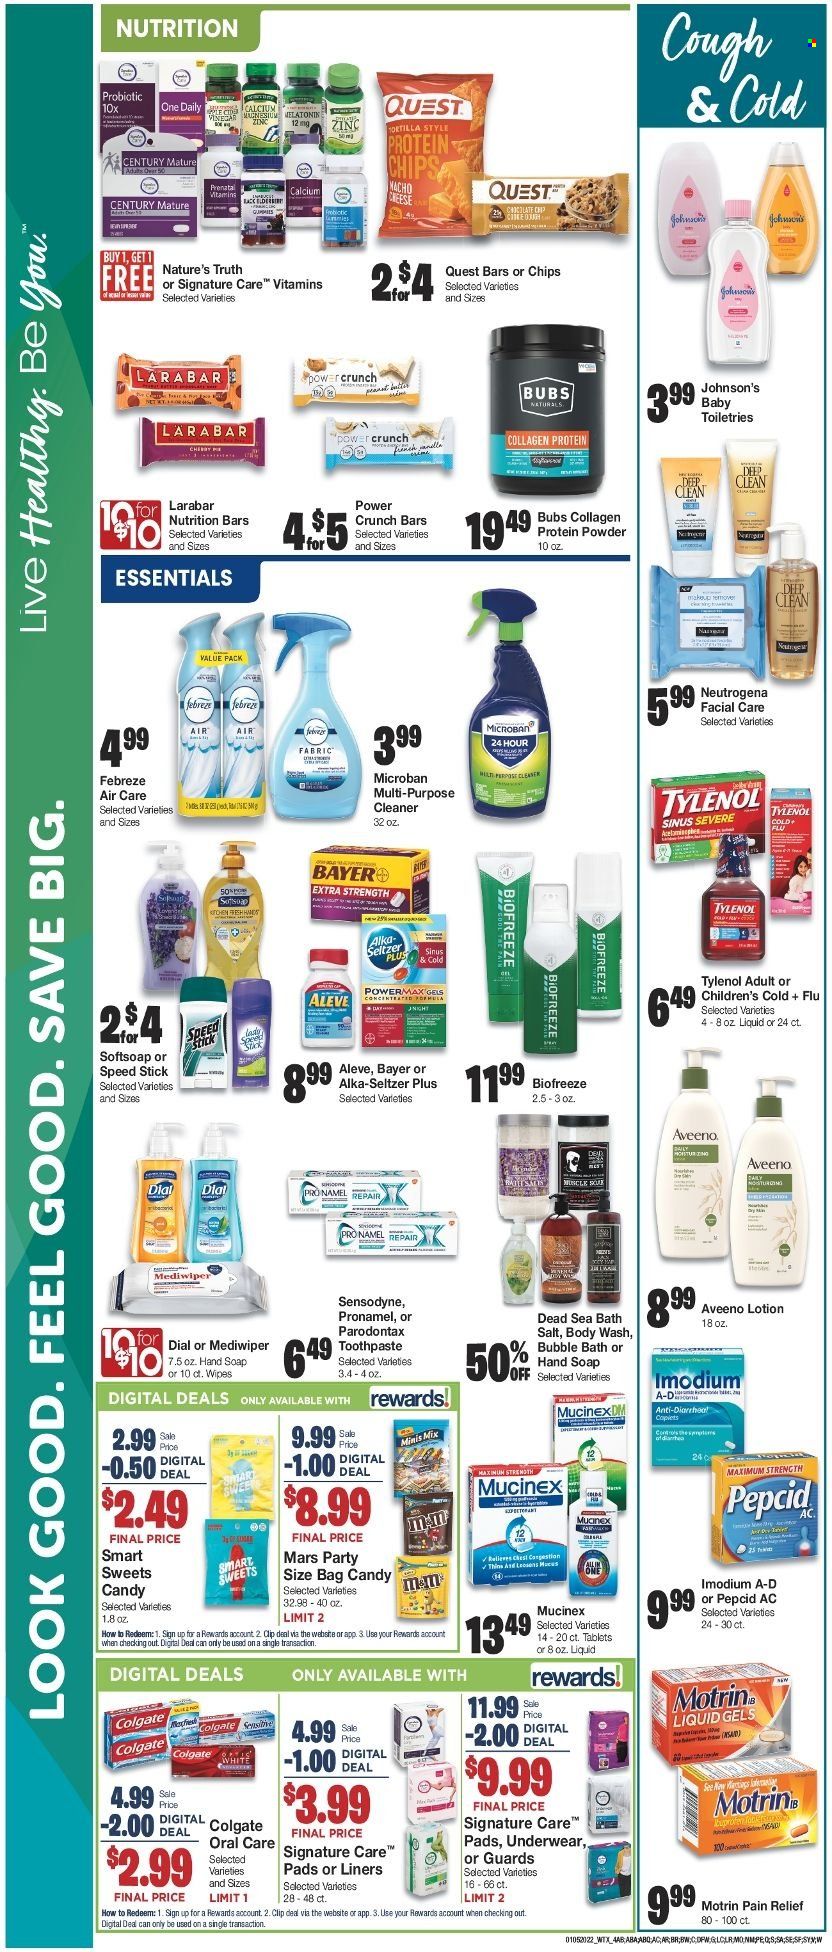 thumbnail - United Supermarkets Flyer - 01/05/2022 - 01/11/2022 - Sales products - cheese, Mars, chips, nutrition bar, wipes, Johnson's, Febreze, cleaner, bath salt, body wash, bubble bath, Softsoap, hand soap, Dial, soap, Colgate, toothpaste, Sensodyne, sanitary pads, Aveeno, Neutrogena, body lotion, Speed Stick, bag, Aleve, calcium, Mucinex, Nature's Truth, Tylenol, Imodium, Prenatal, pain relief, Pepcid, zinc, Alka-seltzer, whey protein, one daily, Bayer, Motrin. Page 4.